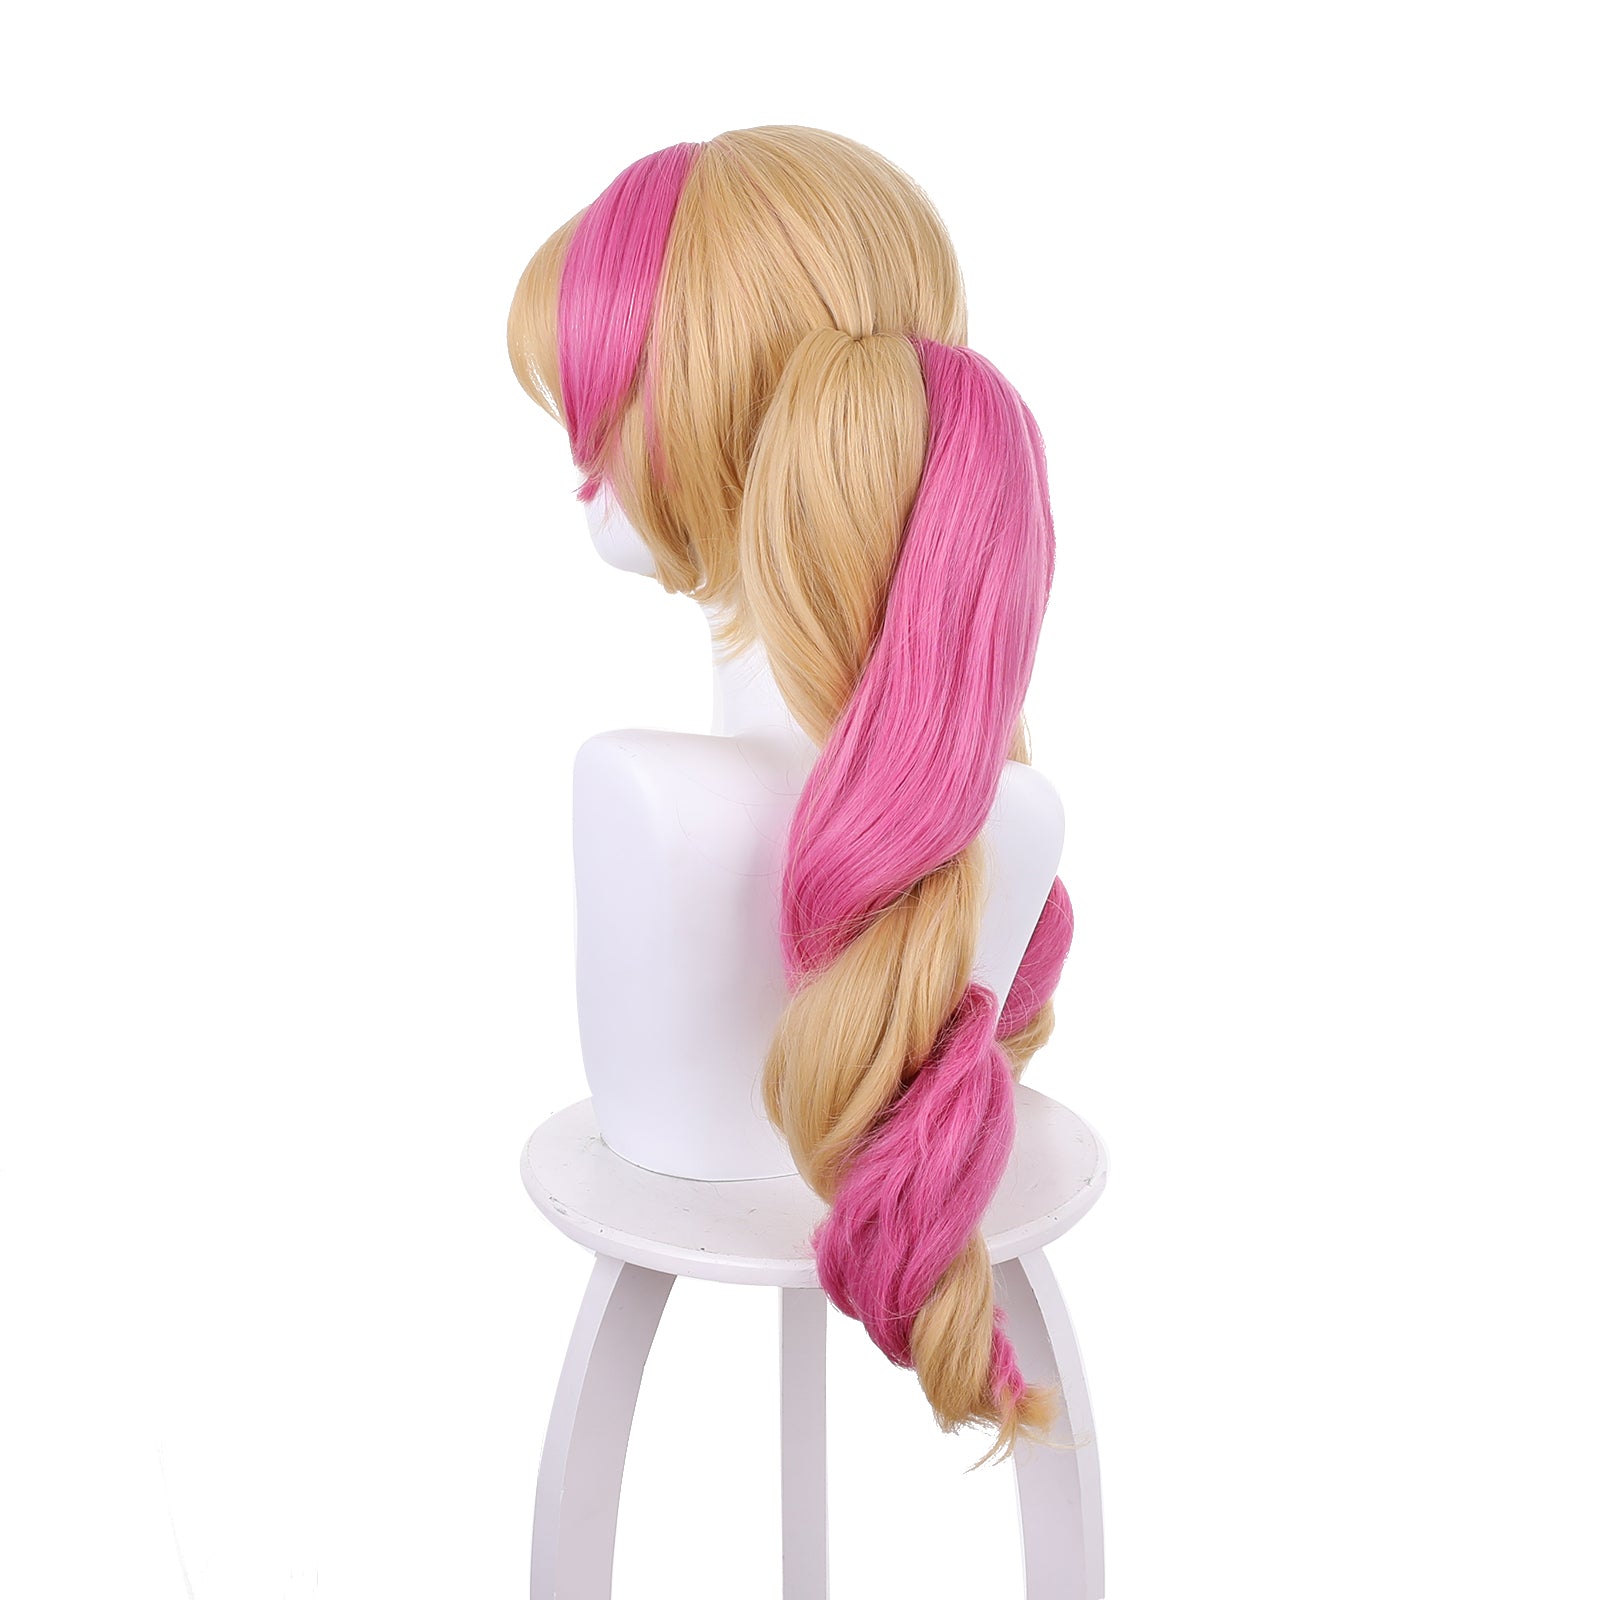 Rulercosplay Game League of Legends LOL Gwen Yellow peach pink Long Cosplay Wig